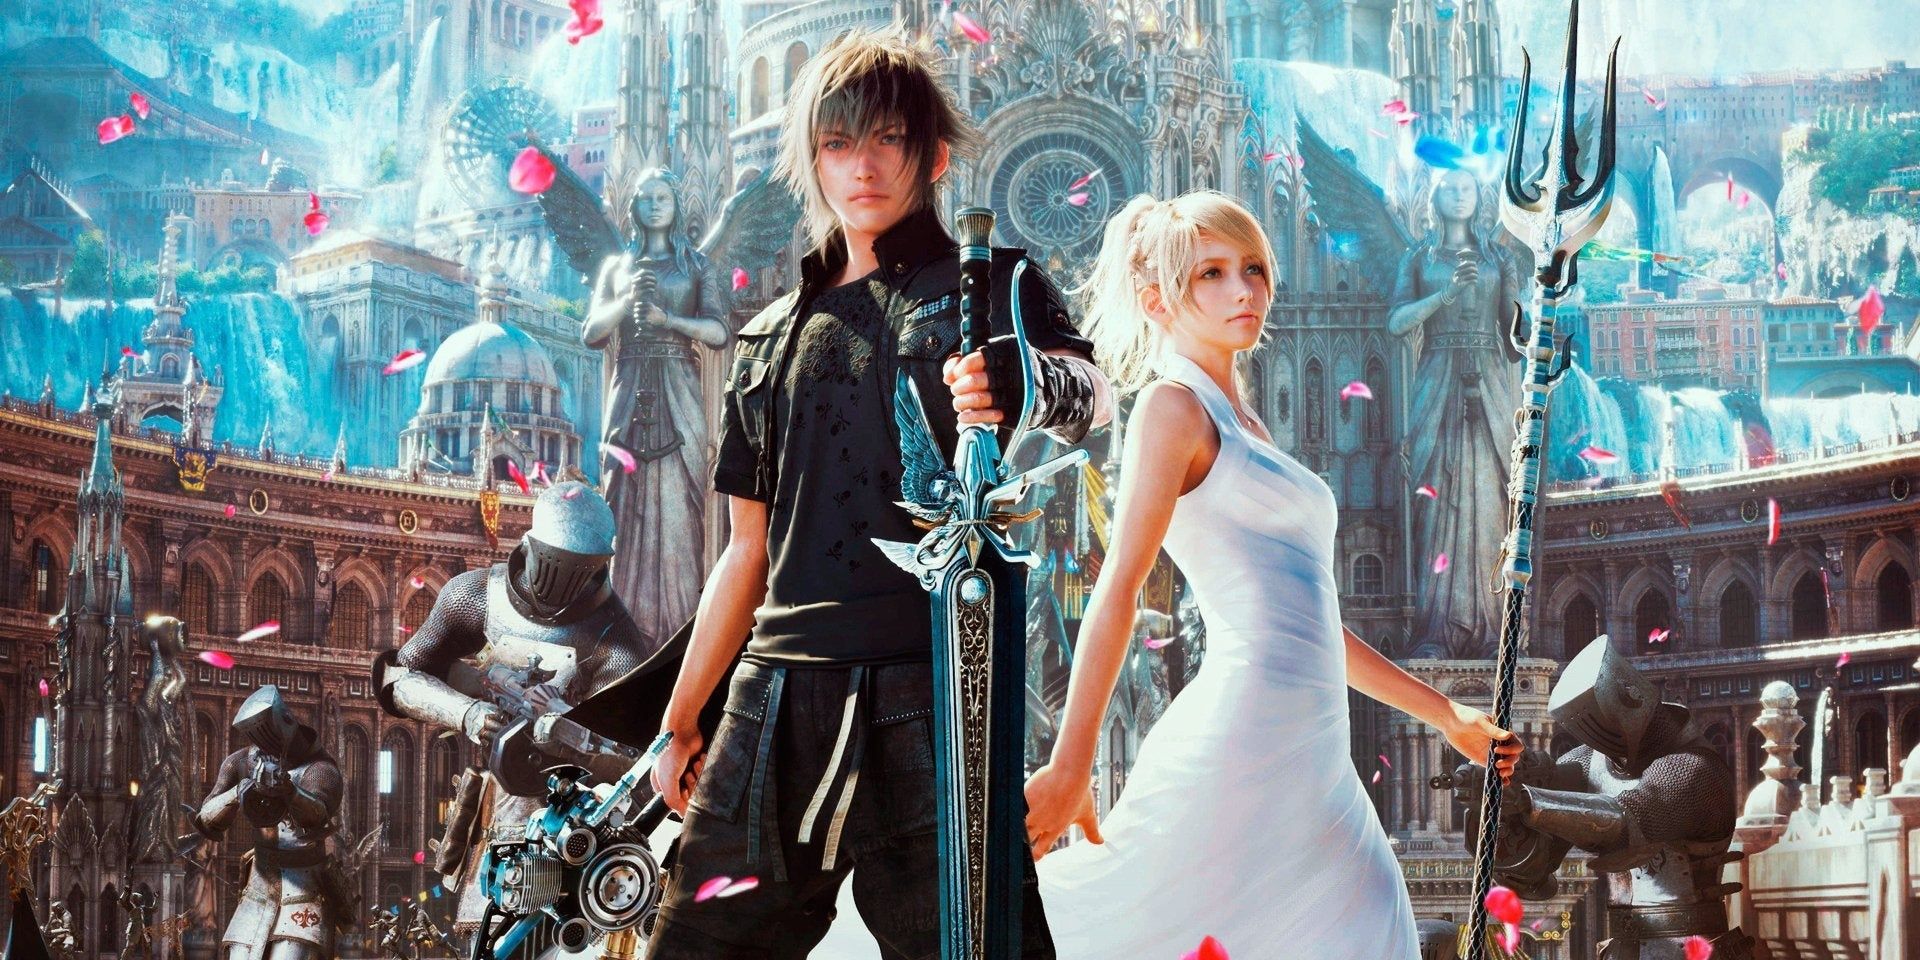 Noctis with his sword and Luna with her pitchfork wearing a wedding dress as romantic rose petals fall over them in joyous celebration.